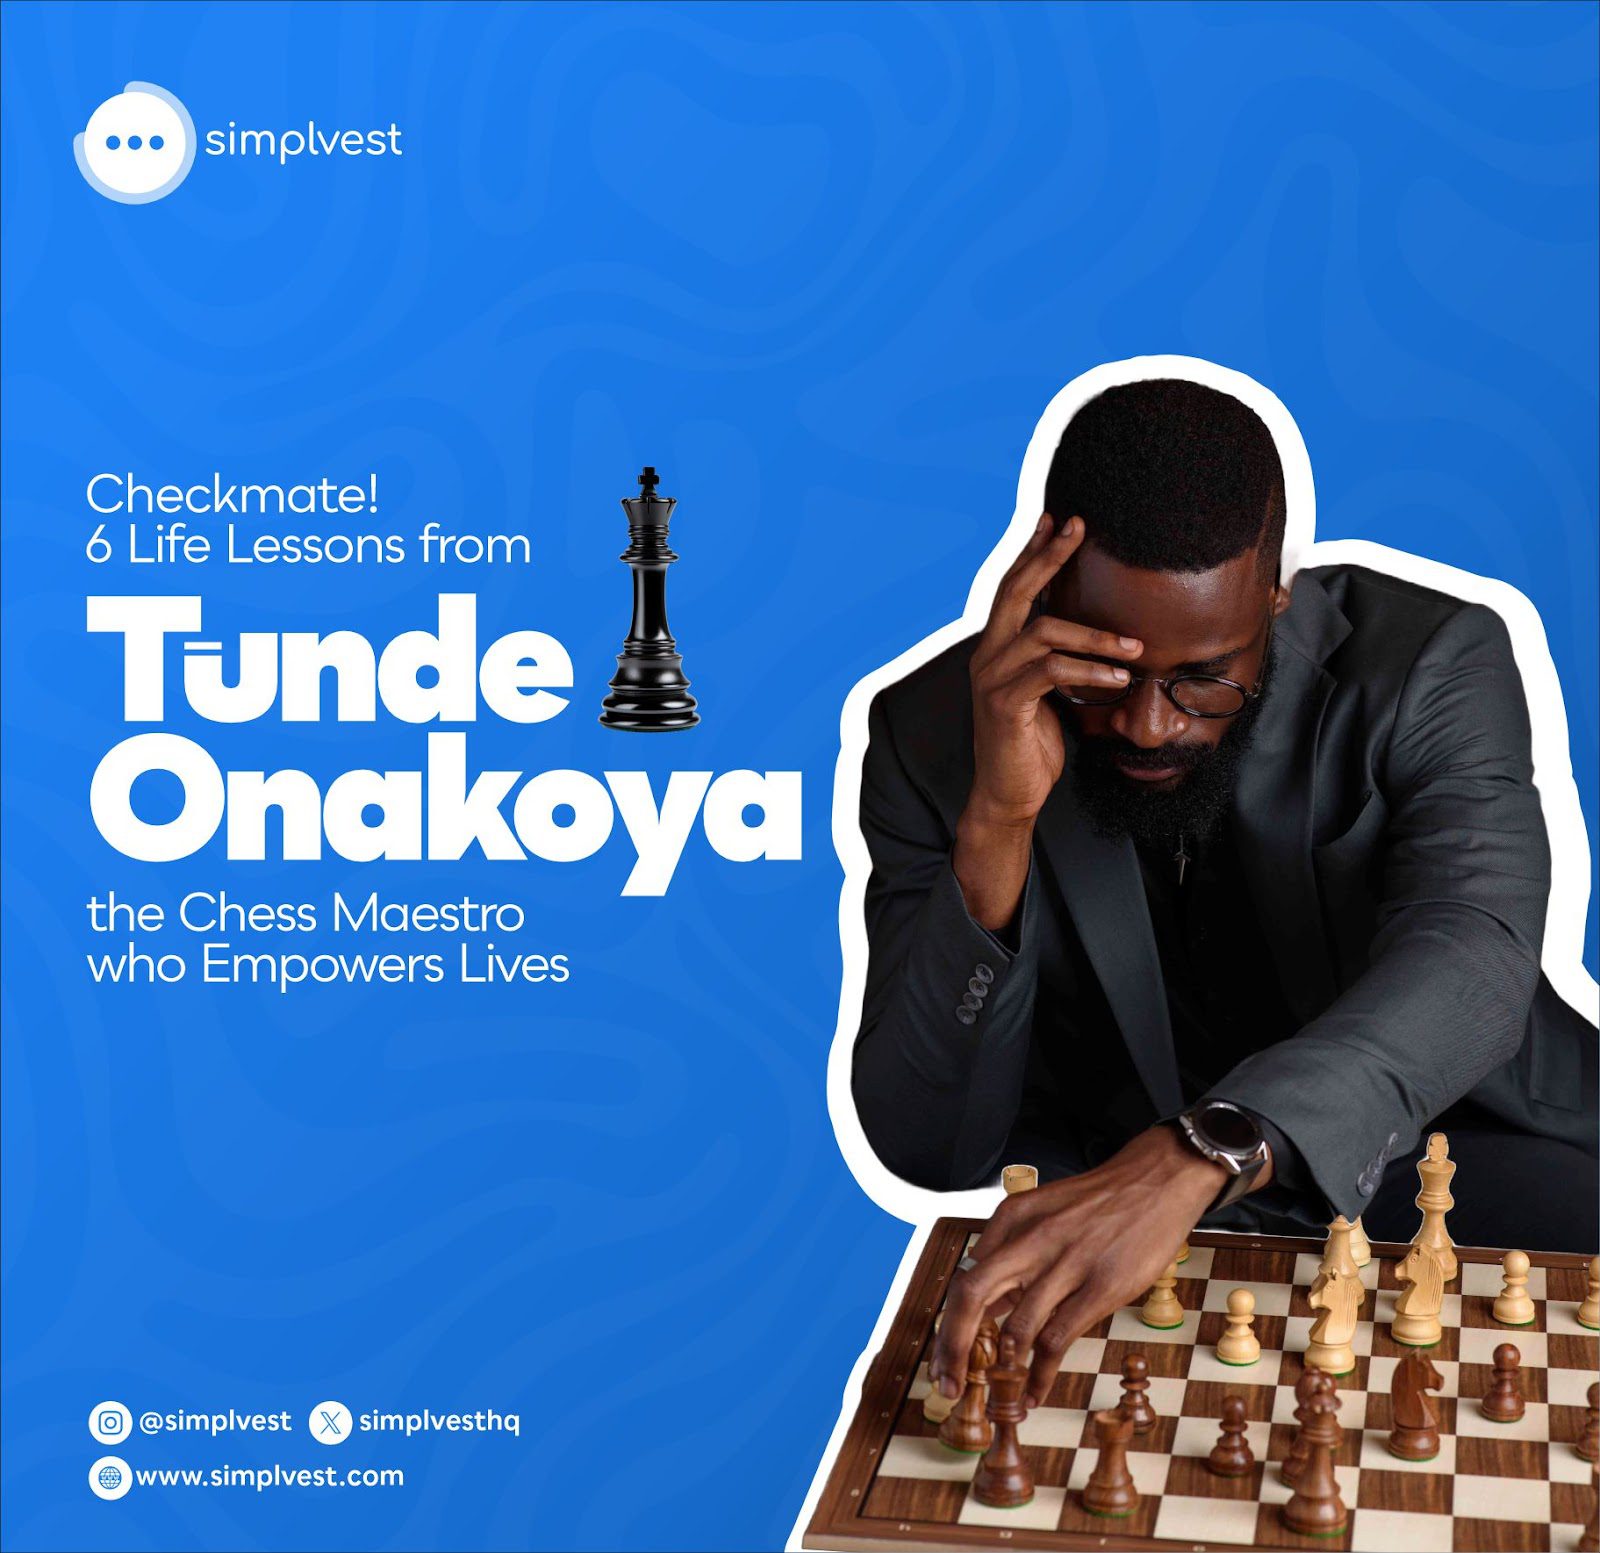 Tunde Onakoya, the chess maestro empowering lives through his NGO, Chess in Slums Africa.